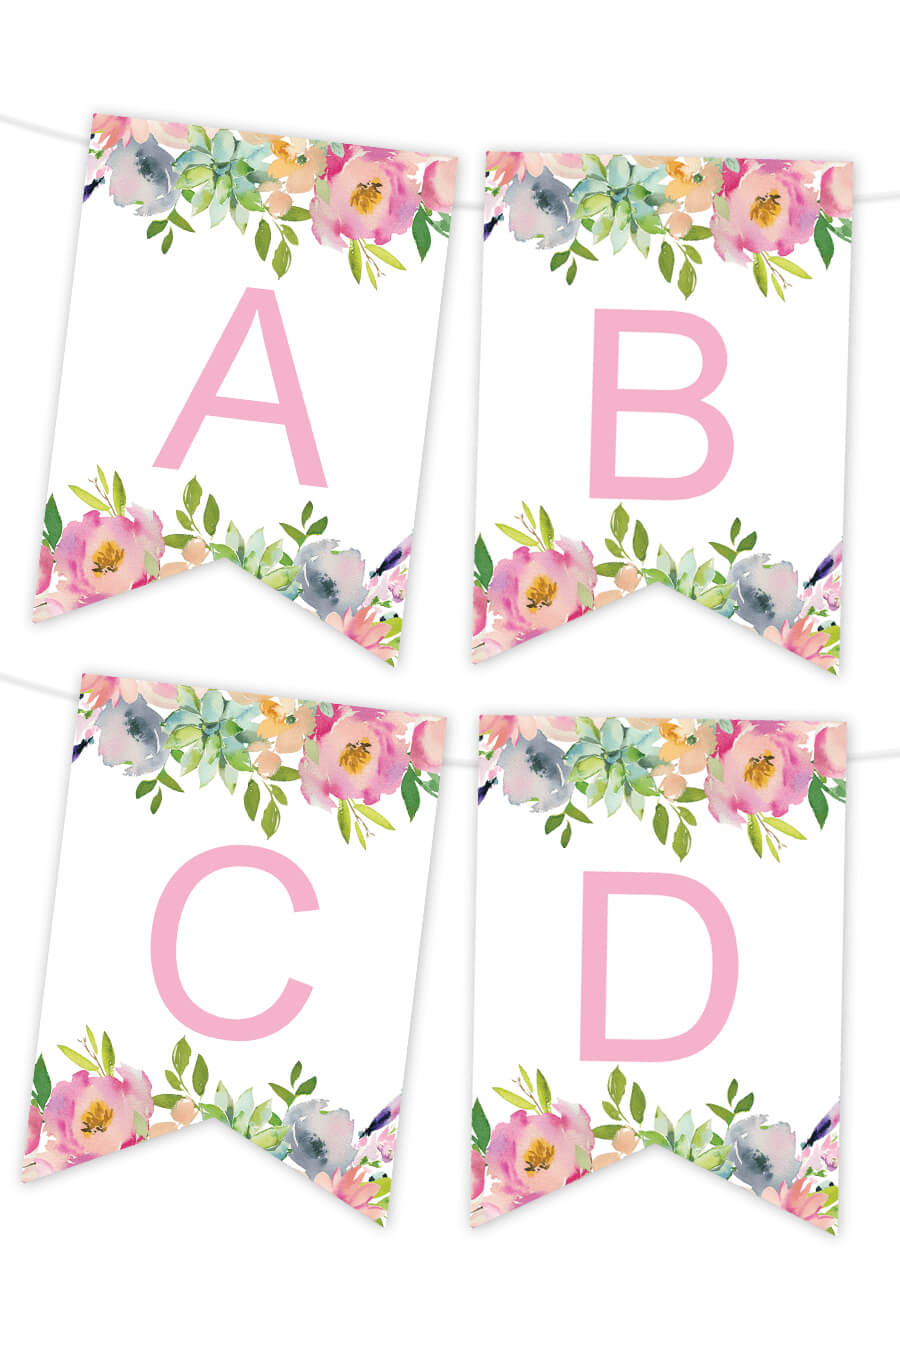 Printable Banners – Make Your Own Banners With Our Printable Regarding Diy Banner Template Free